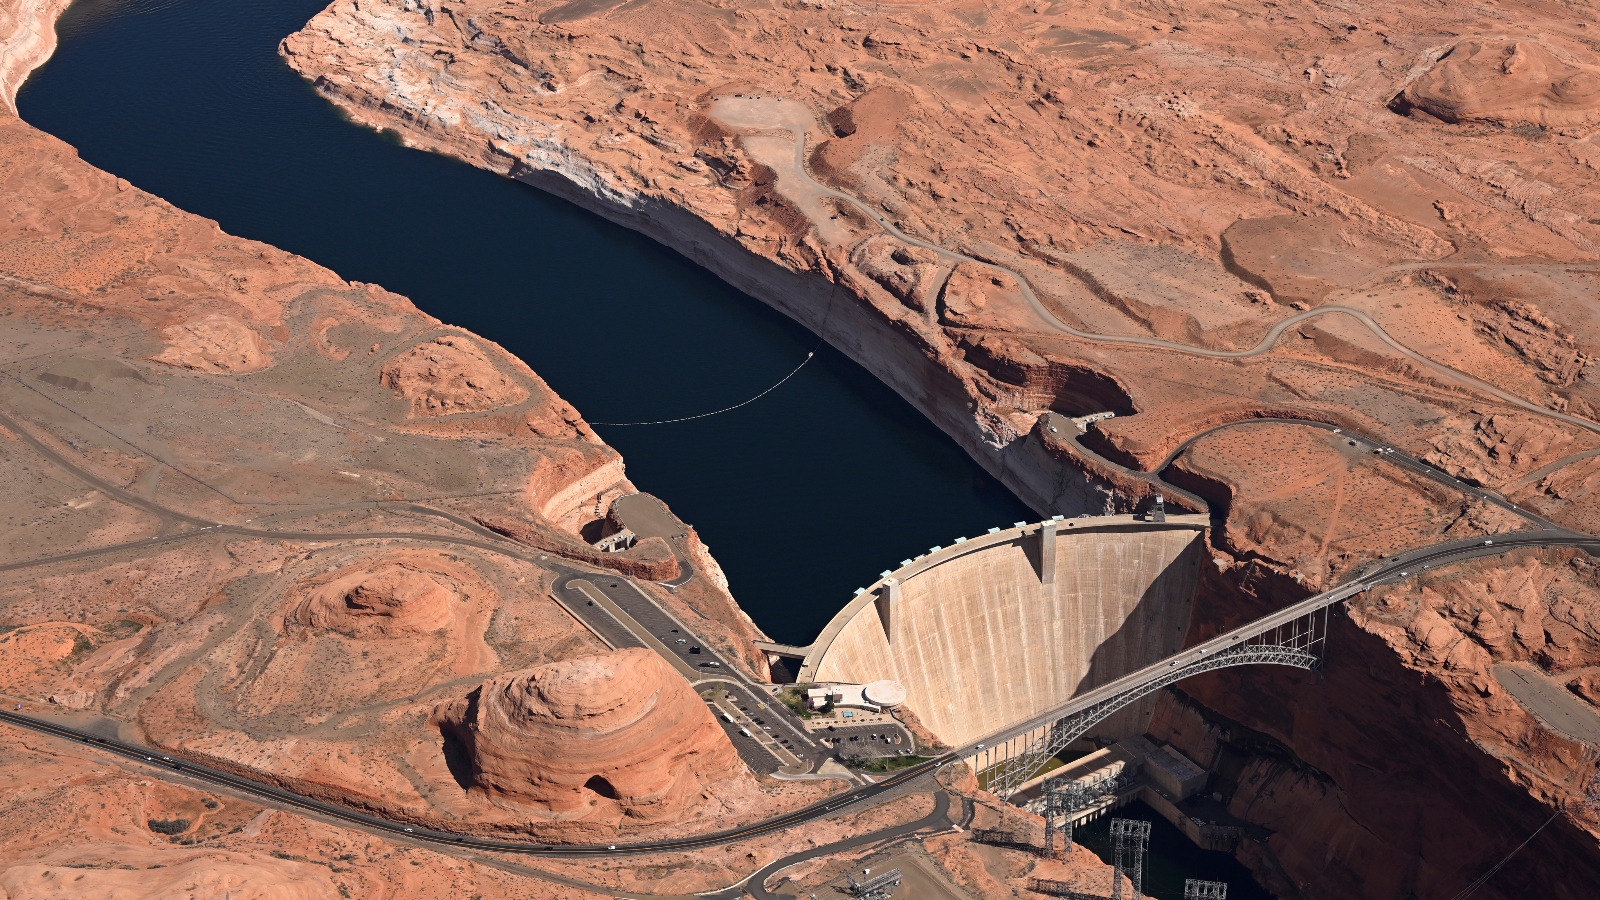 Glen Canyon Dam holds back water to create the Lake Powell reservoir. The dam divides the river's Upper Basin from its Lower Basin.